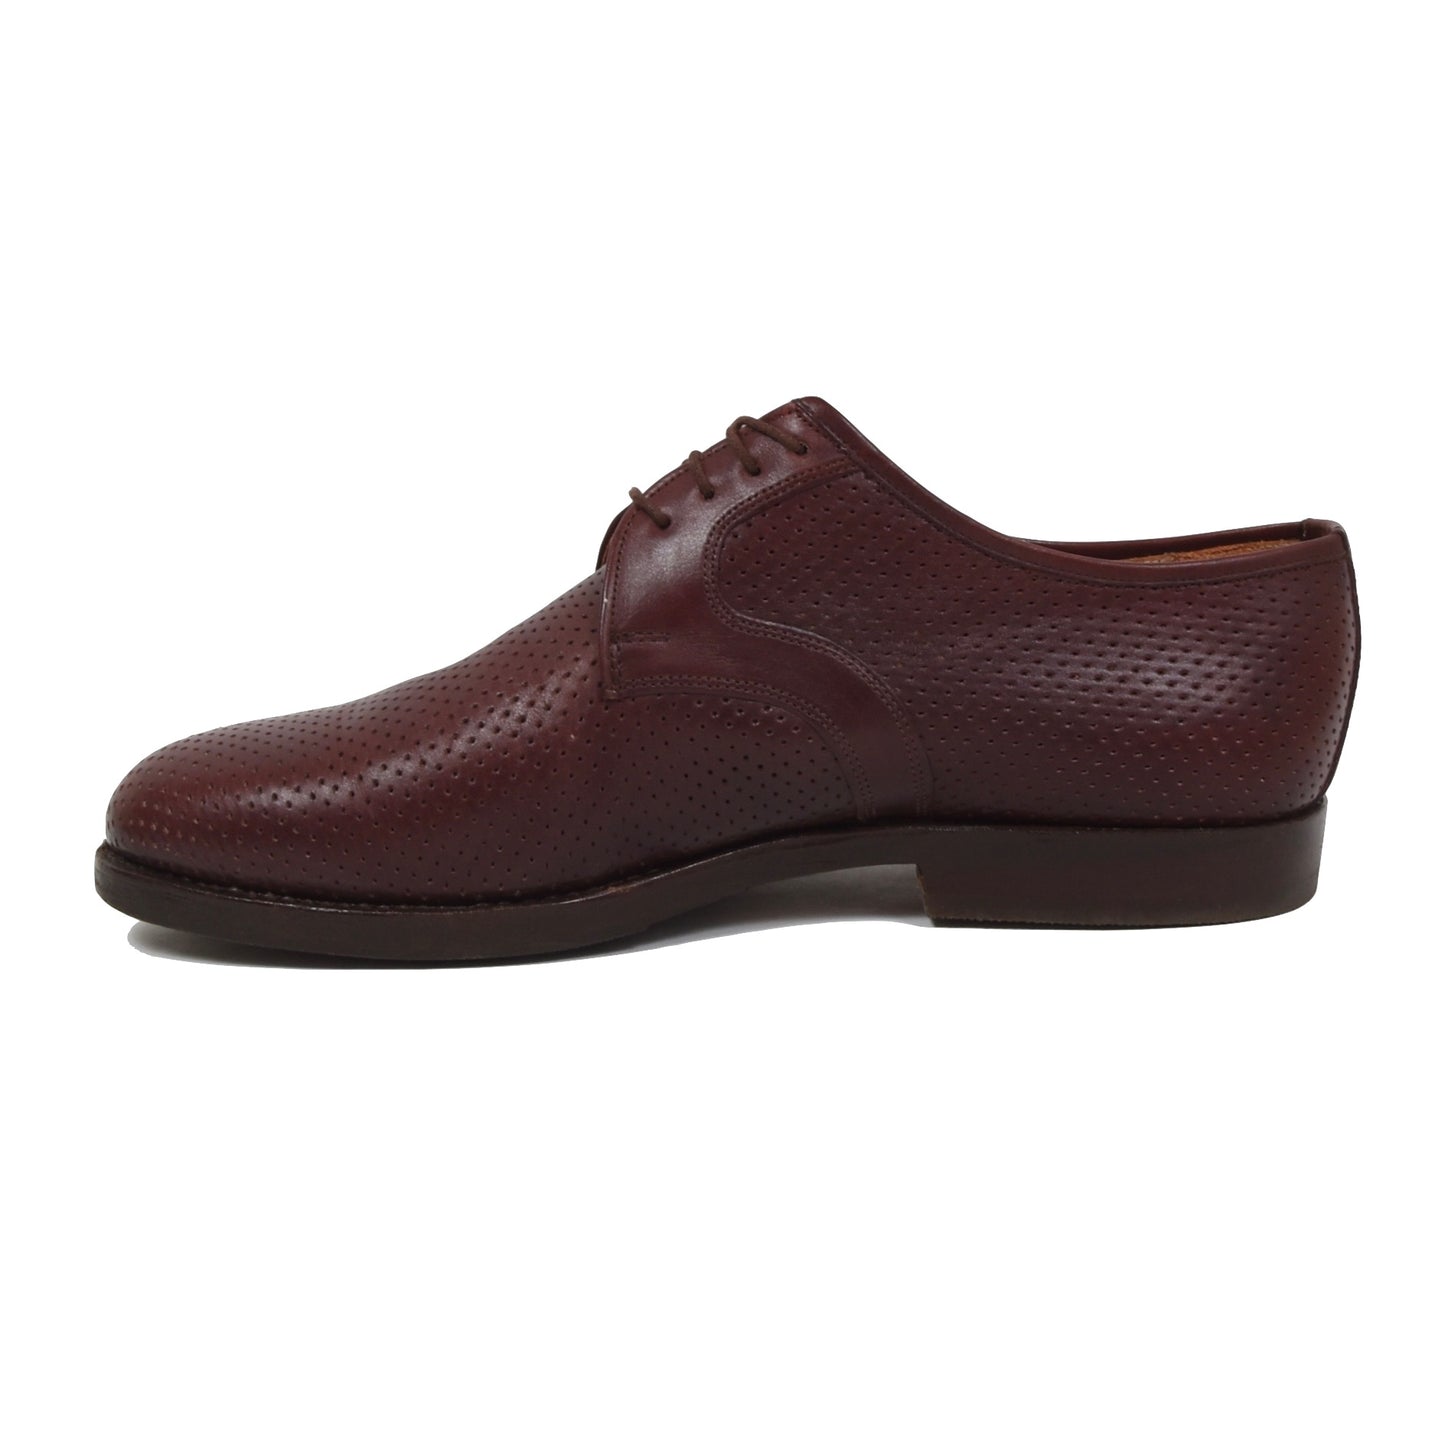 Ludwig Reiter Perforated Leather Shoes Size 9 - Burgundy